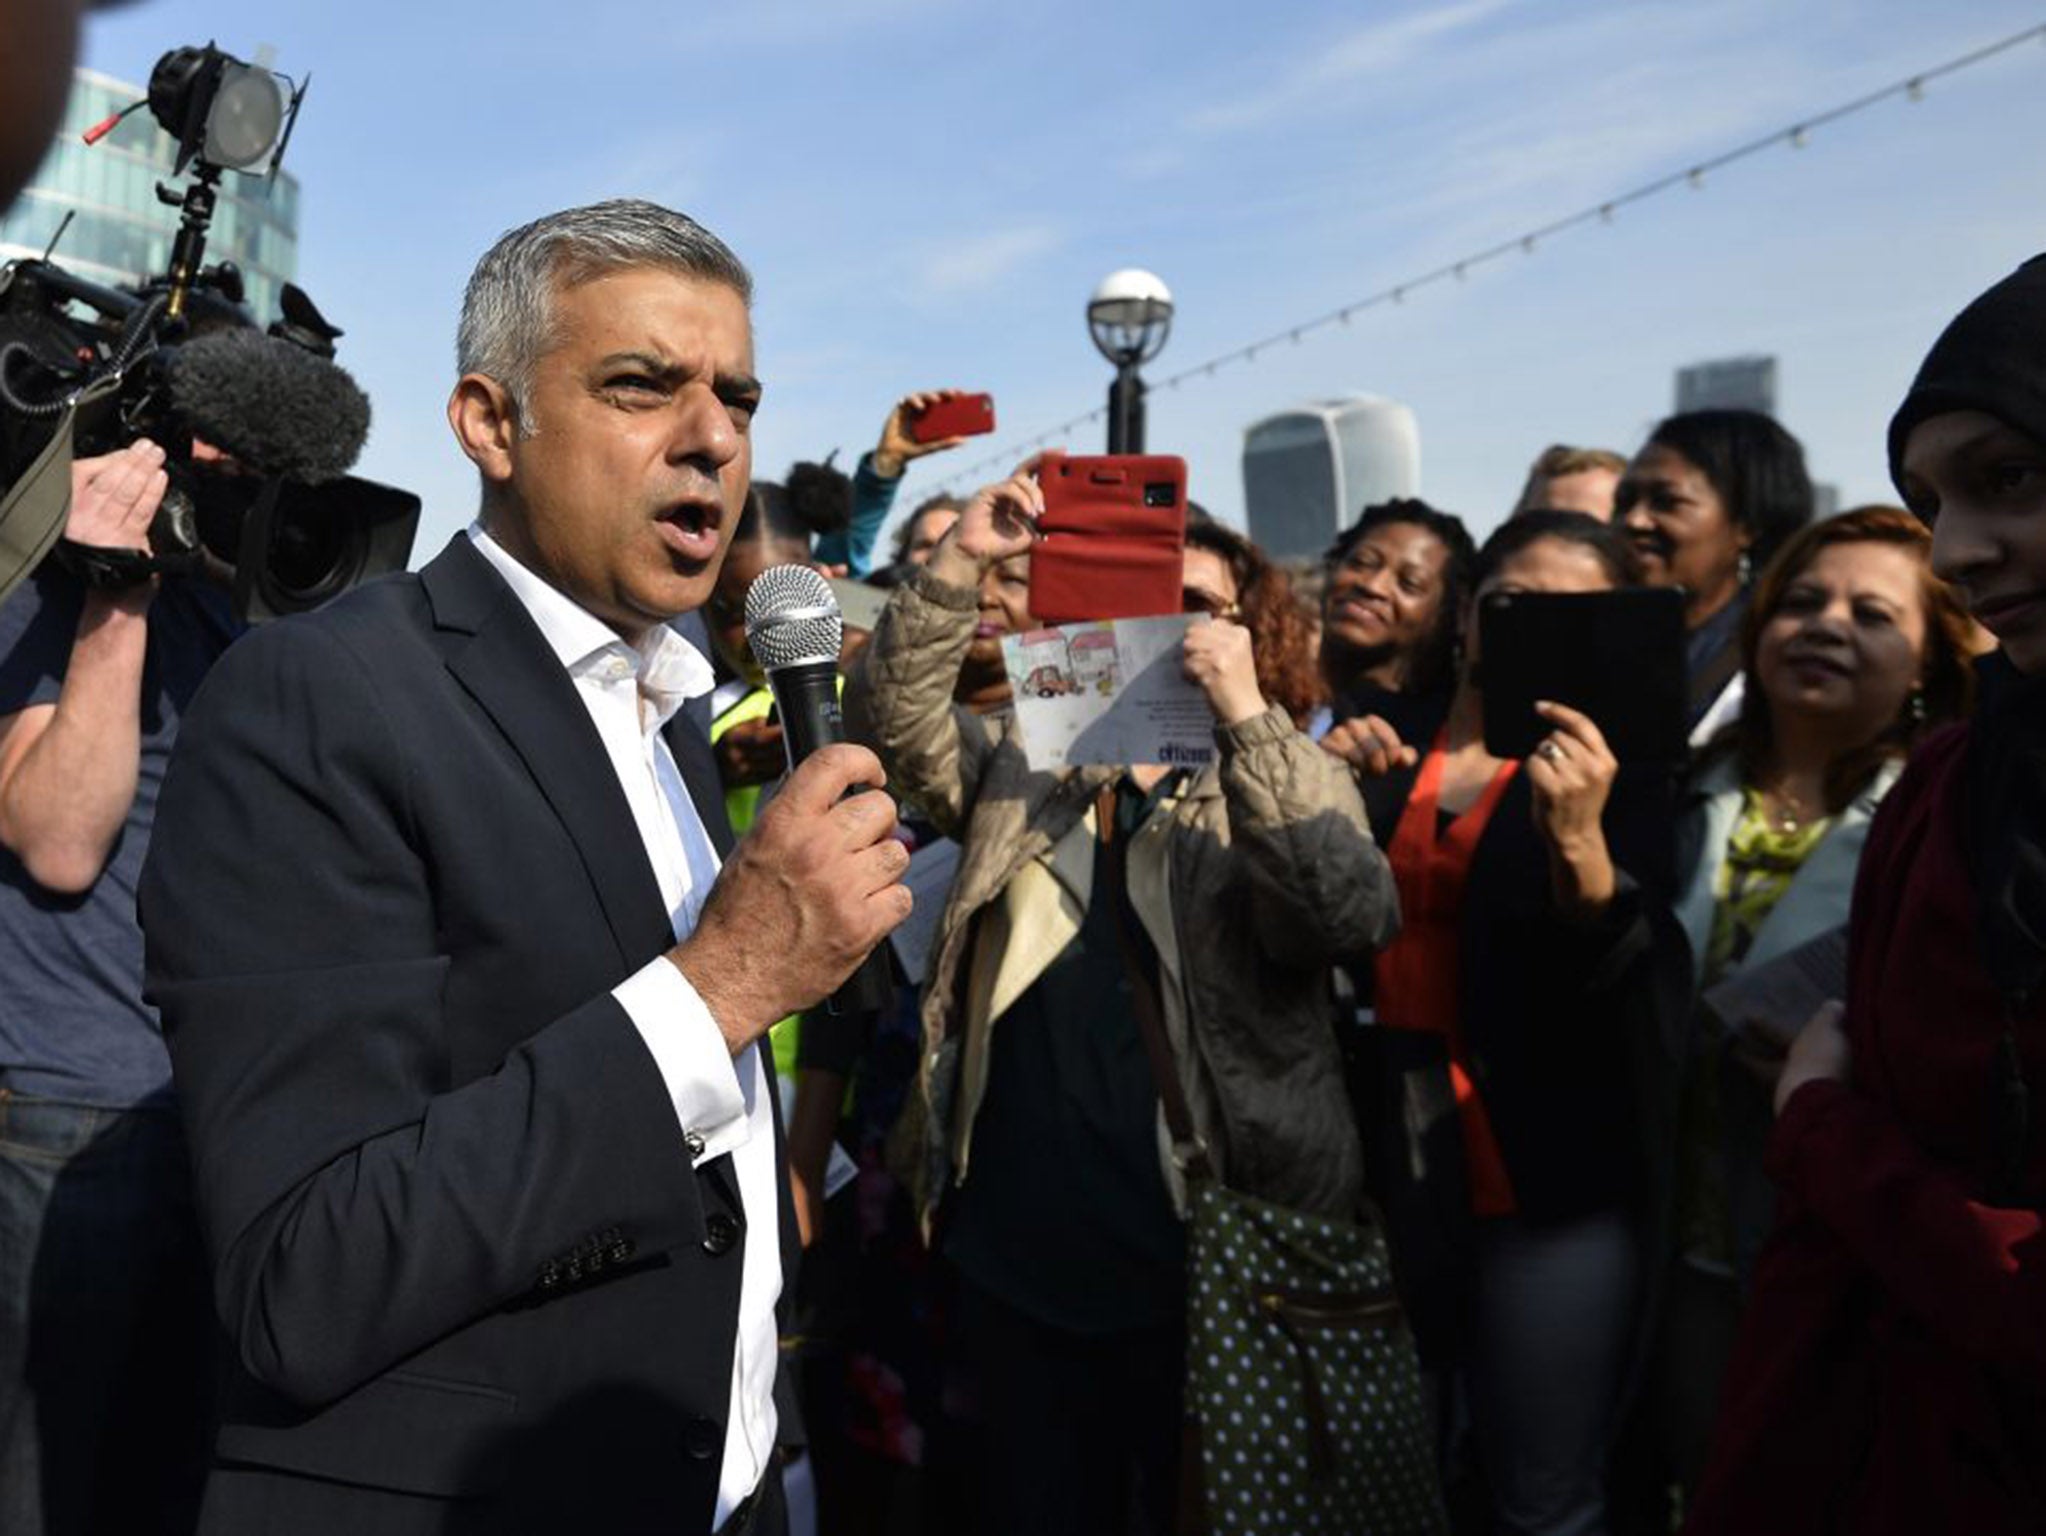 London's newly elected mayor Sadiq Khan speaks to supporters on his first day at City Hall